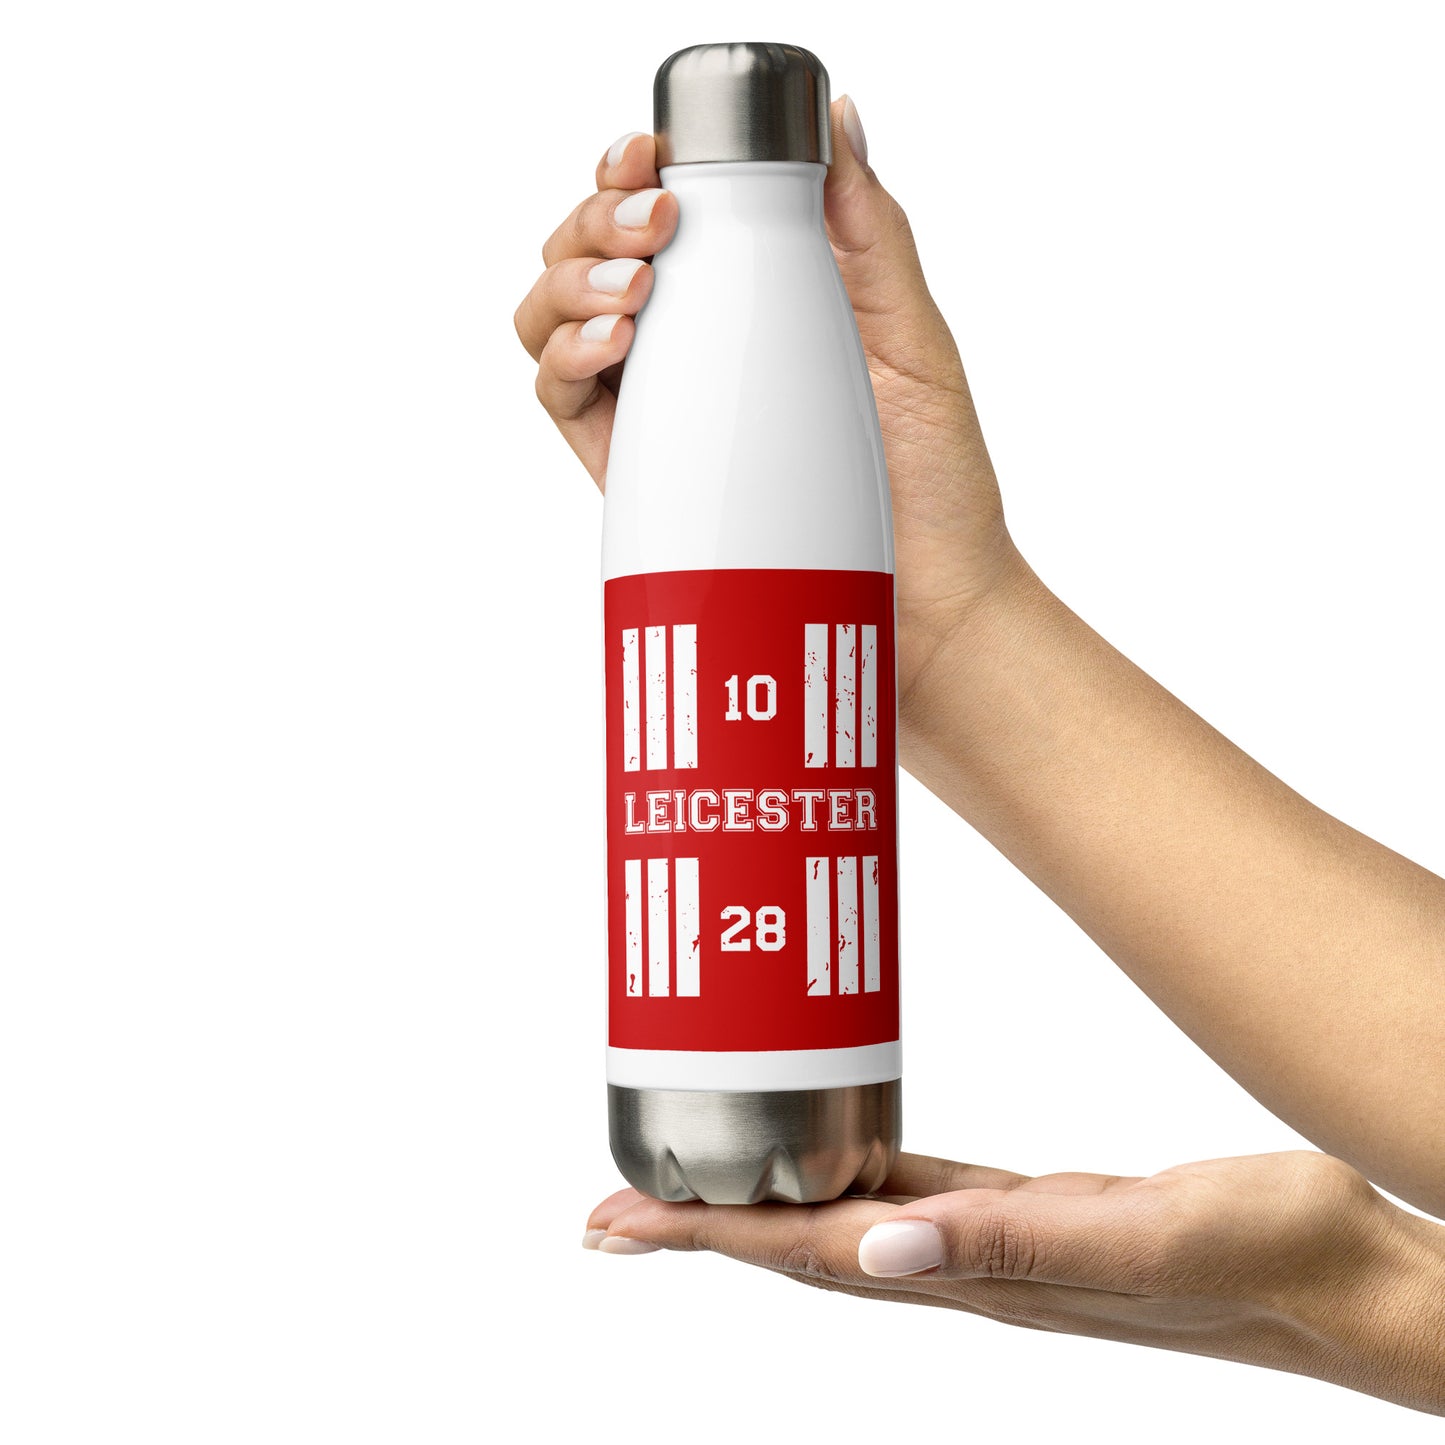 The Leicester Airport runway designator water bottle features a red print with the airport's name and designator framed by stylised threshold markings showing through.